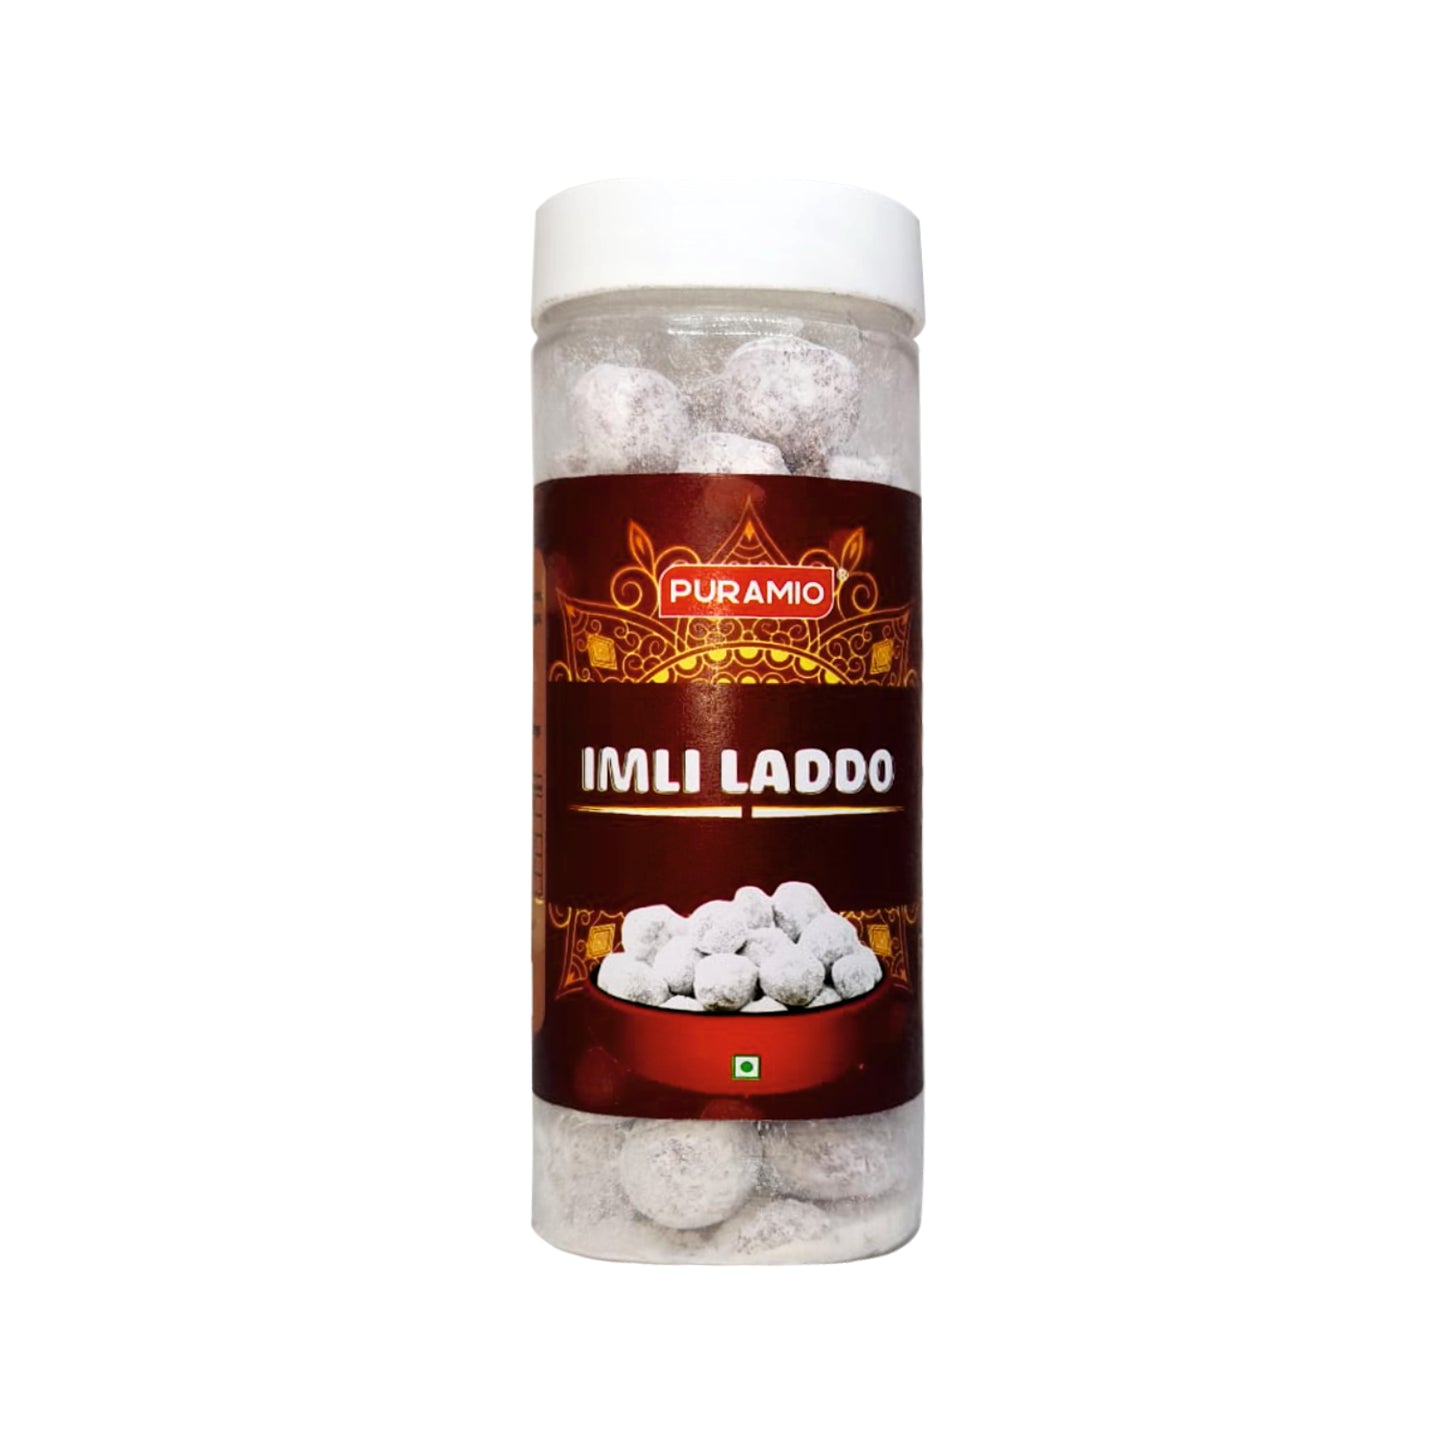 Puramio Imli Laddu | Pure and Premium | Good for Digestion | After Meal Digestive Mouth Freshner,